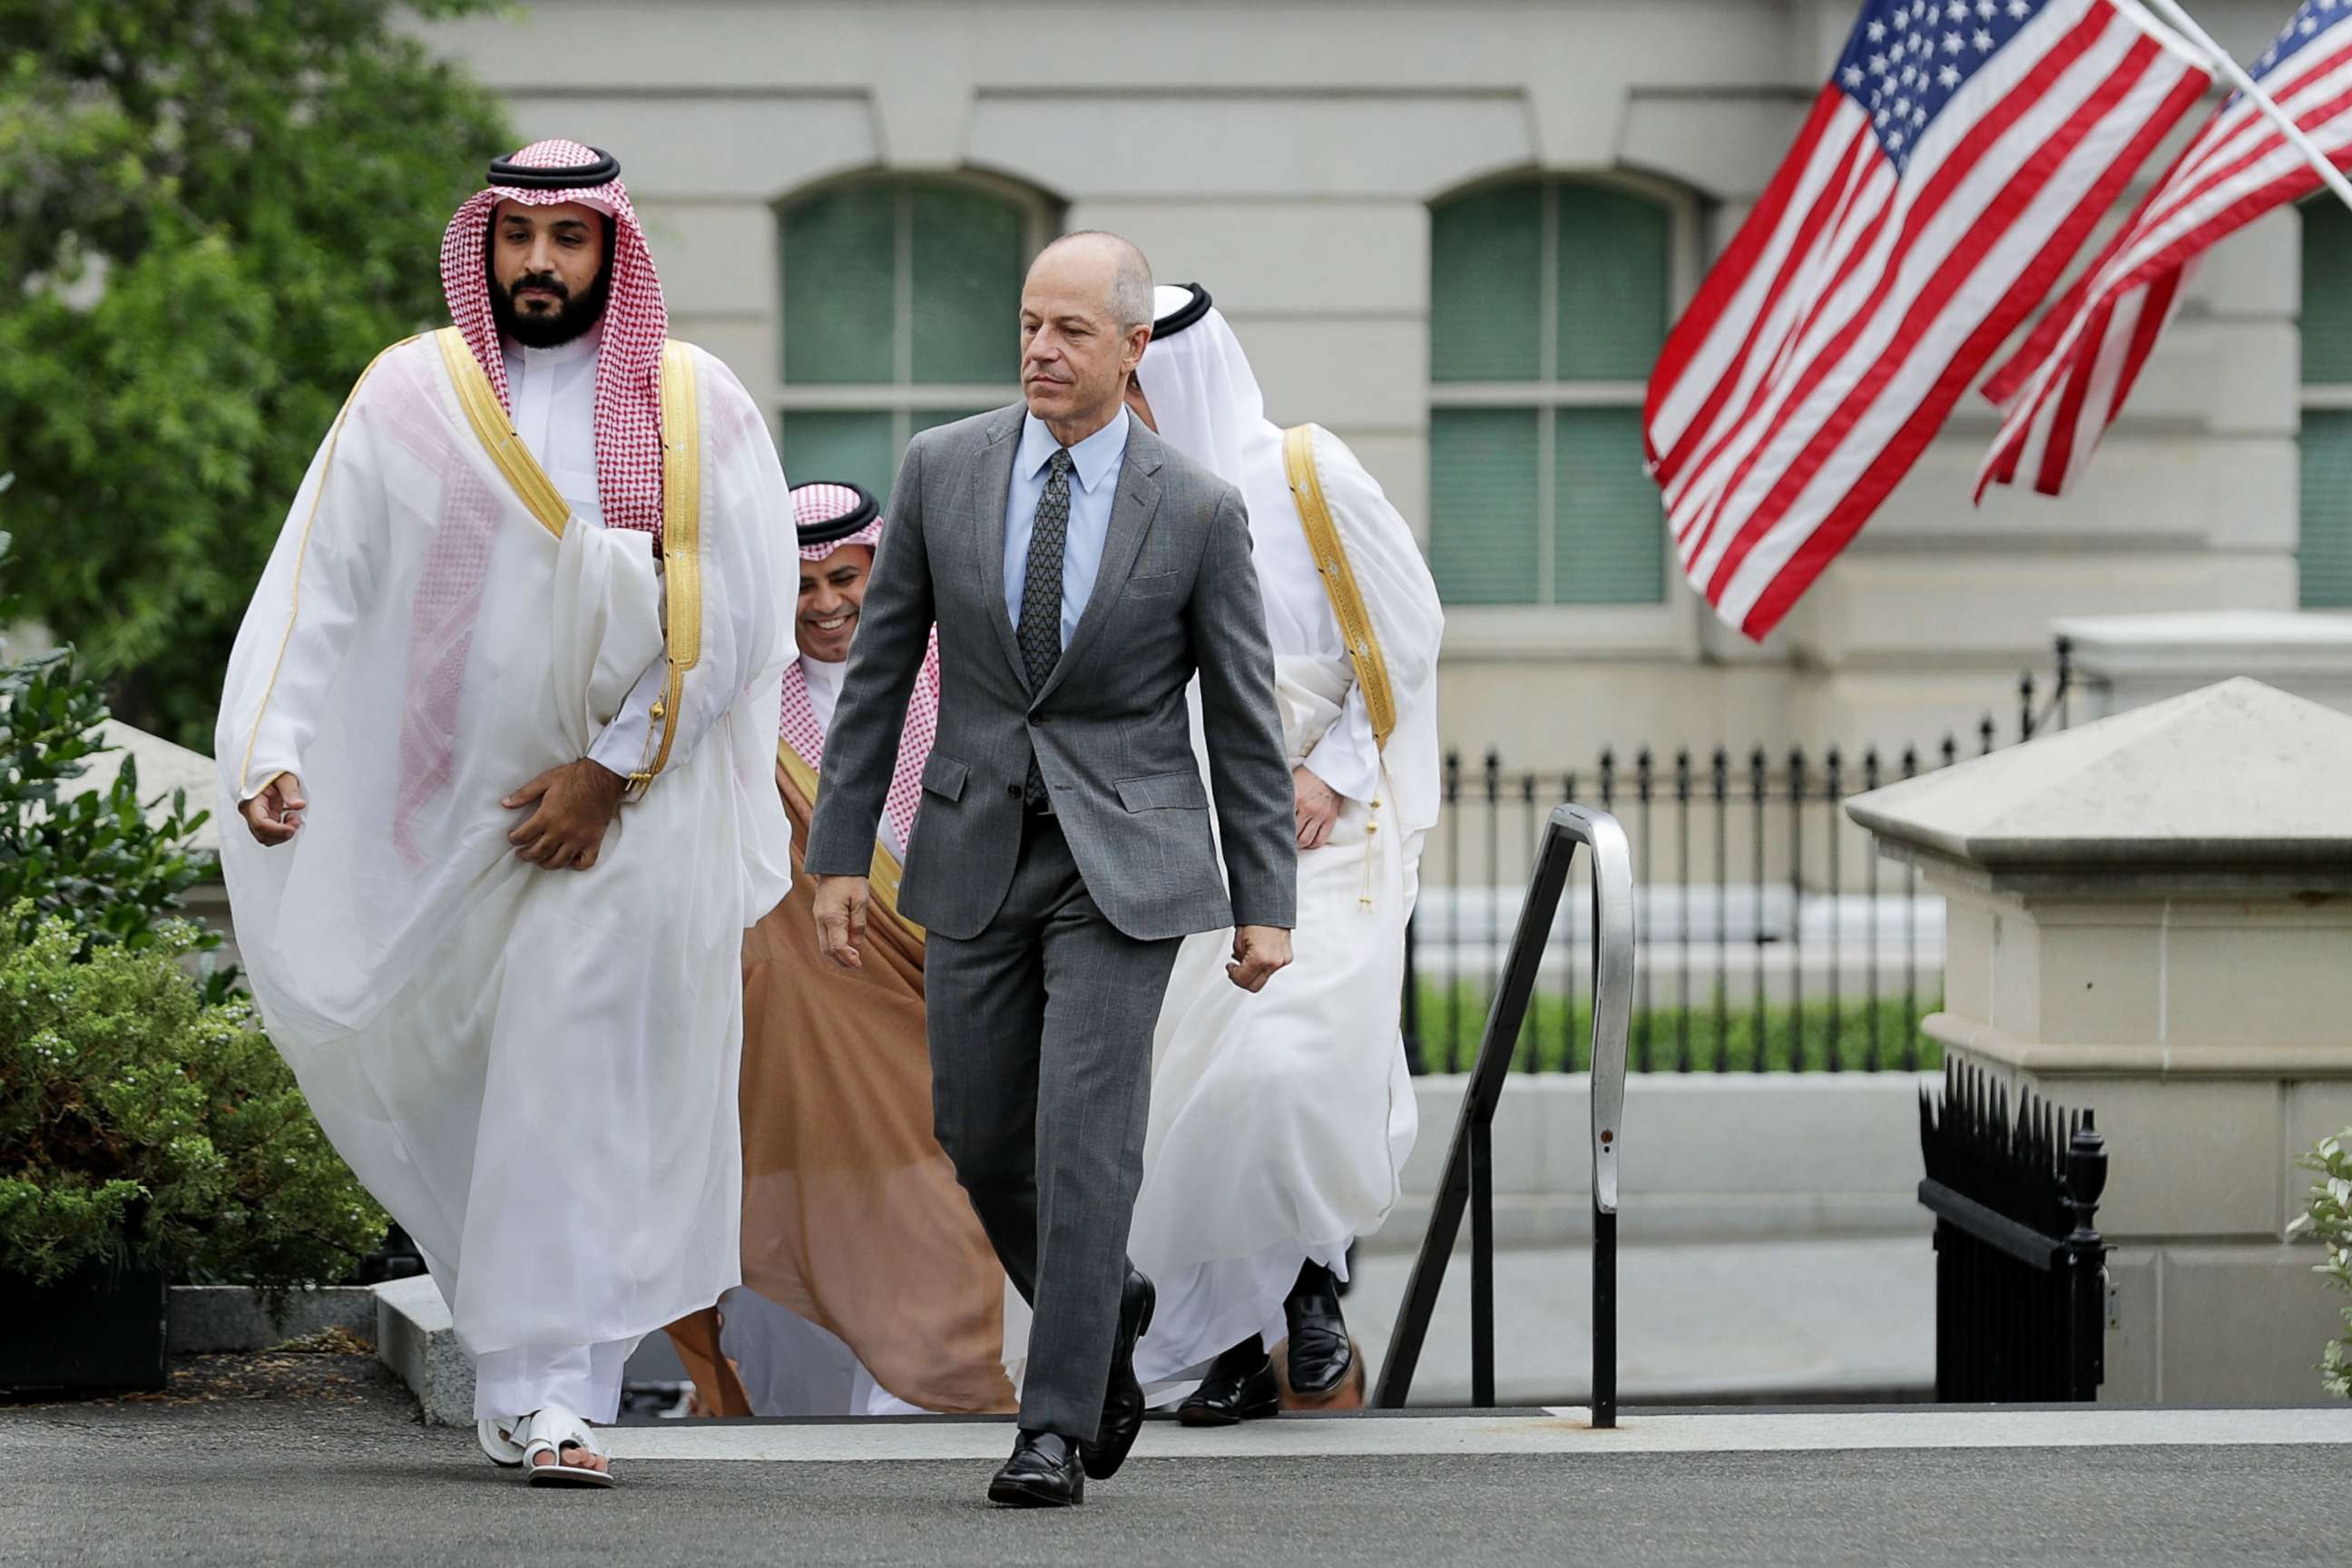 PHOTO: Deputy Crown Prince and Minister of Defense Mohammed bin Salman of Saudi Arabia  is escorted by U.S. Deputy Chief of Protocol Mark Walsh as they walk into in the White House on June 17, 2016 in Washington.